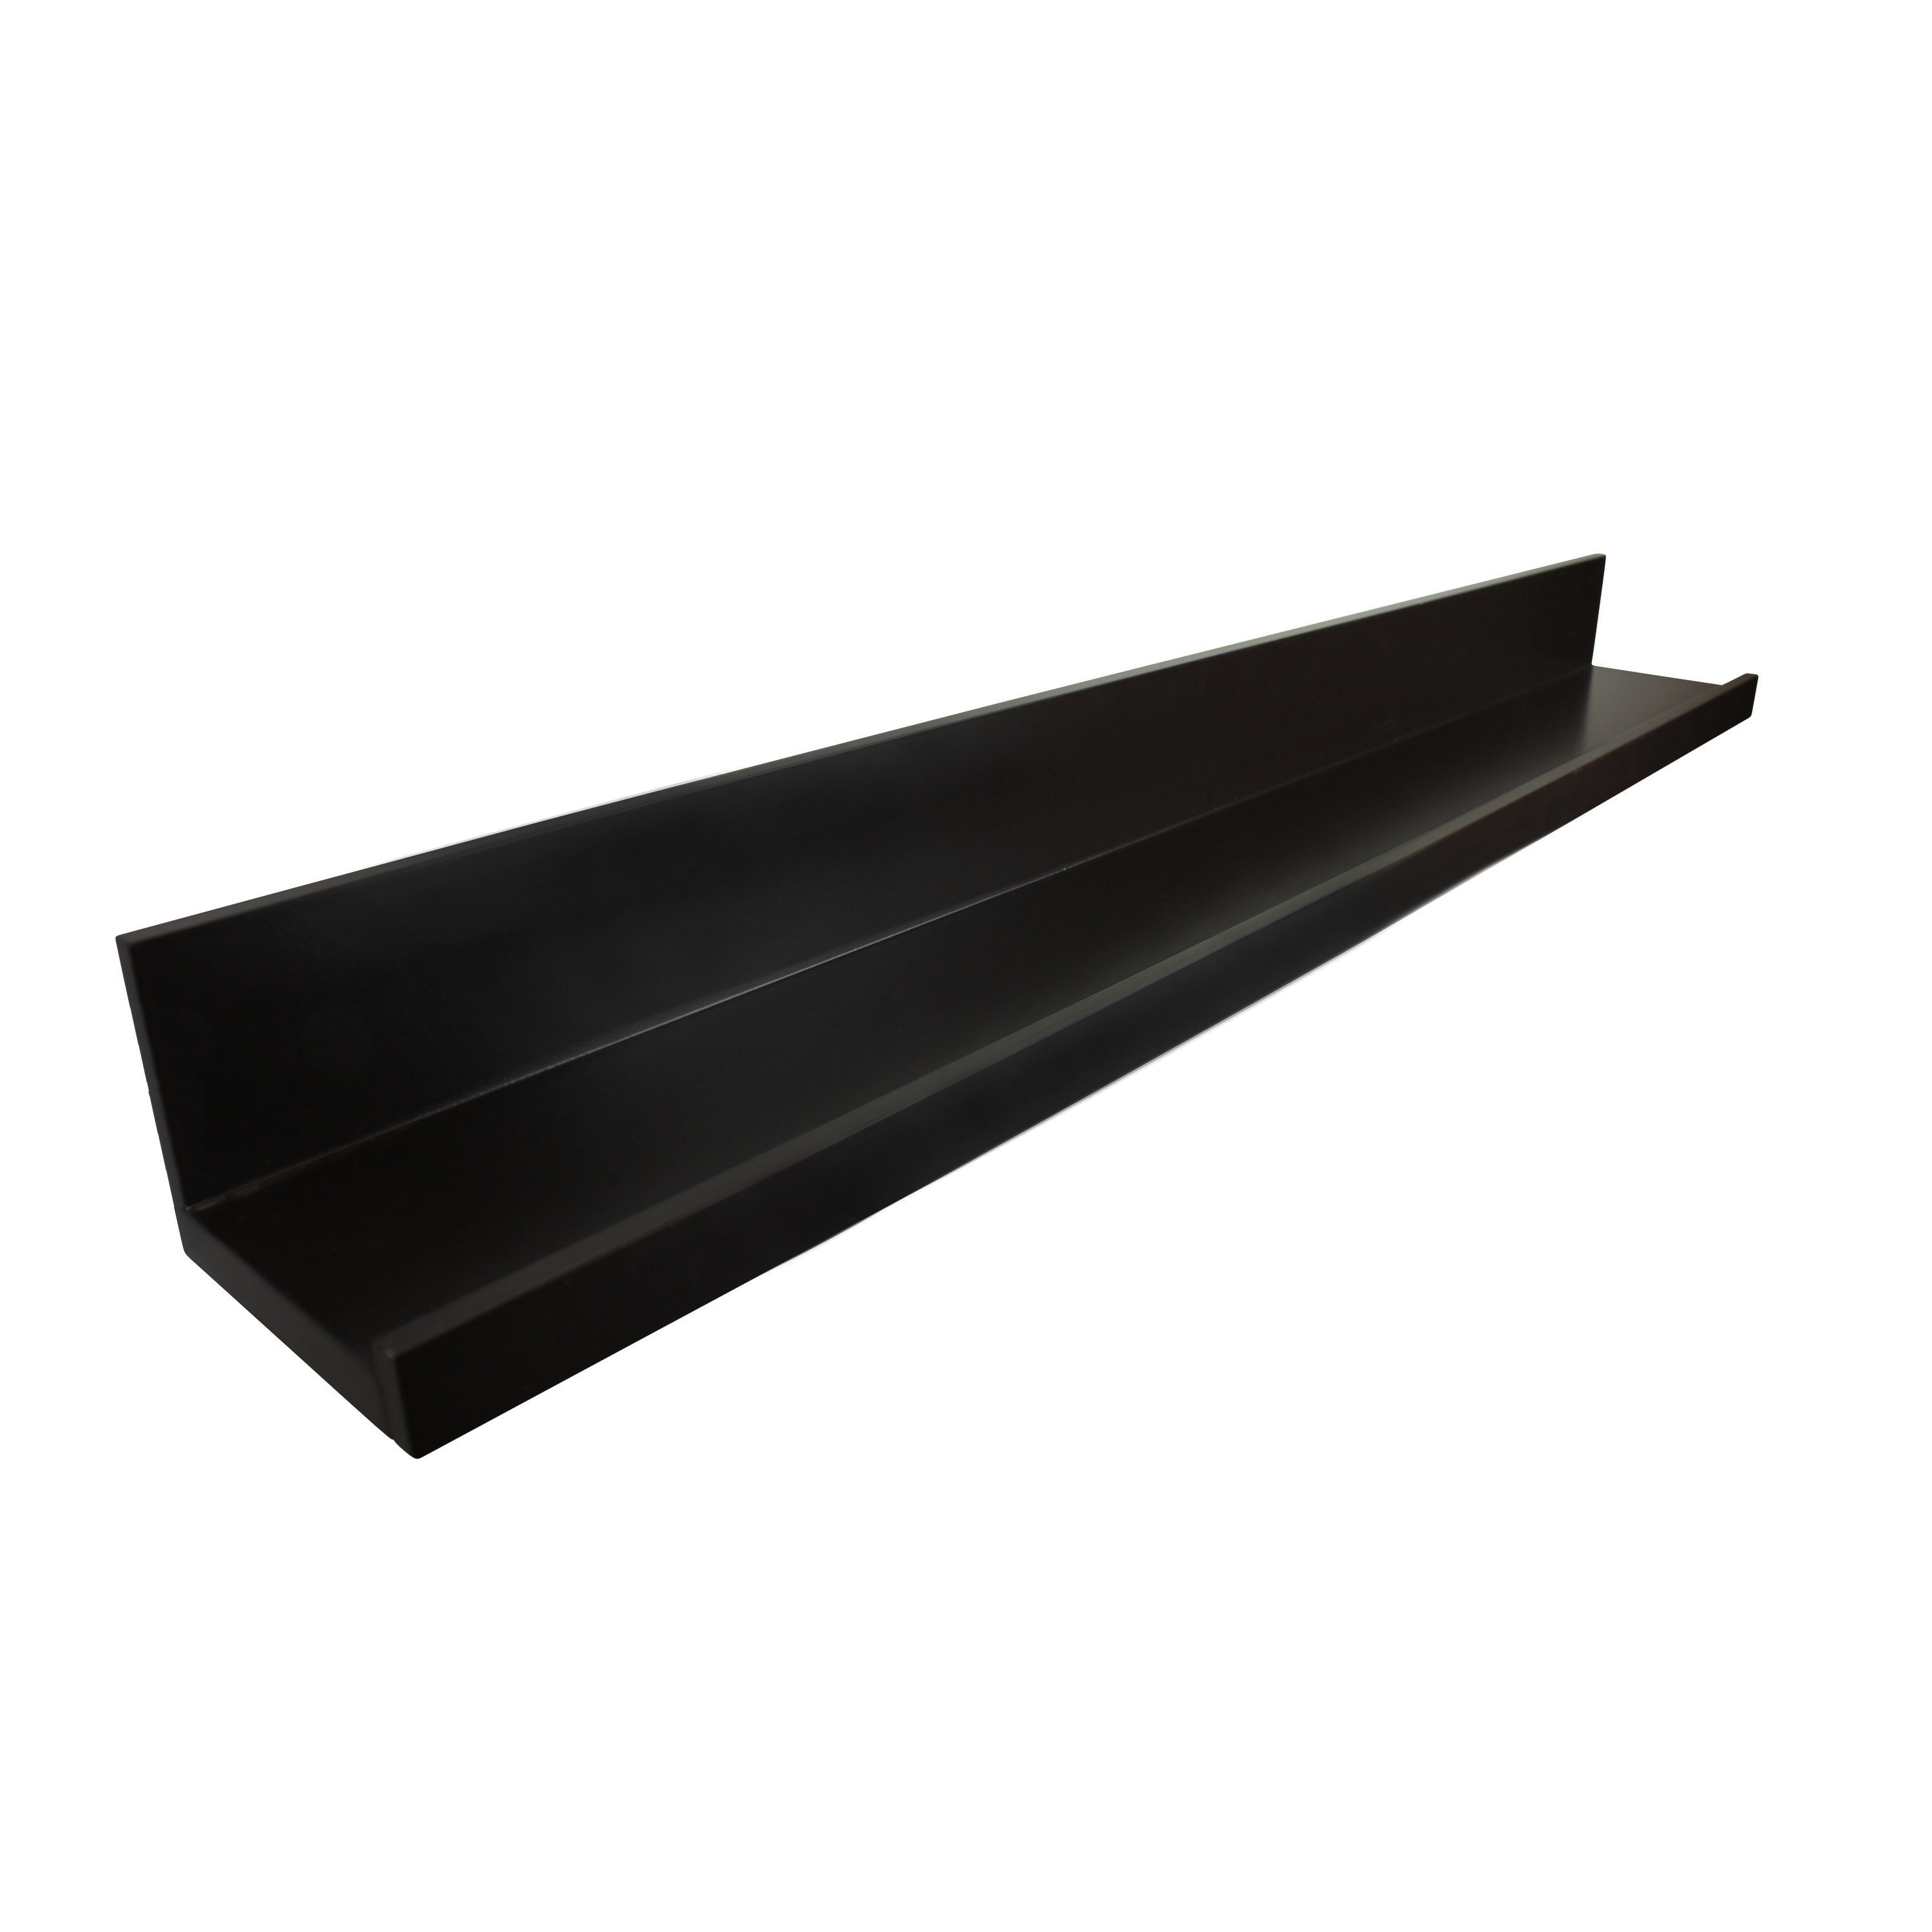 InPlace Rectangle Wood Floating Picture Ledge Wall Shelf One 23.6Wx4.5Dx3.5H Black - image 2 of 4